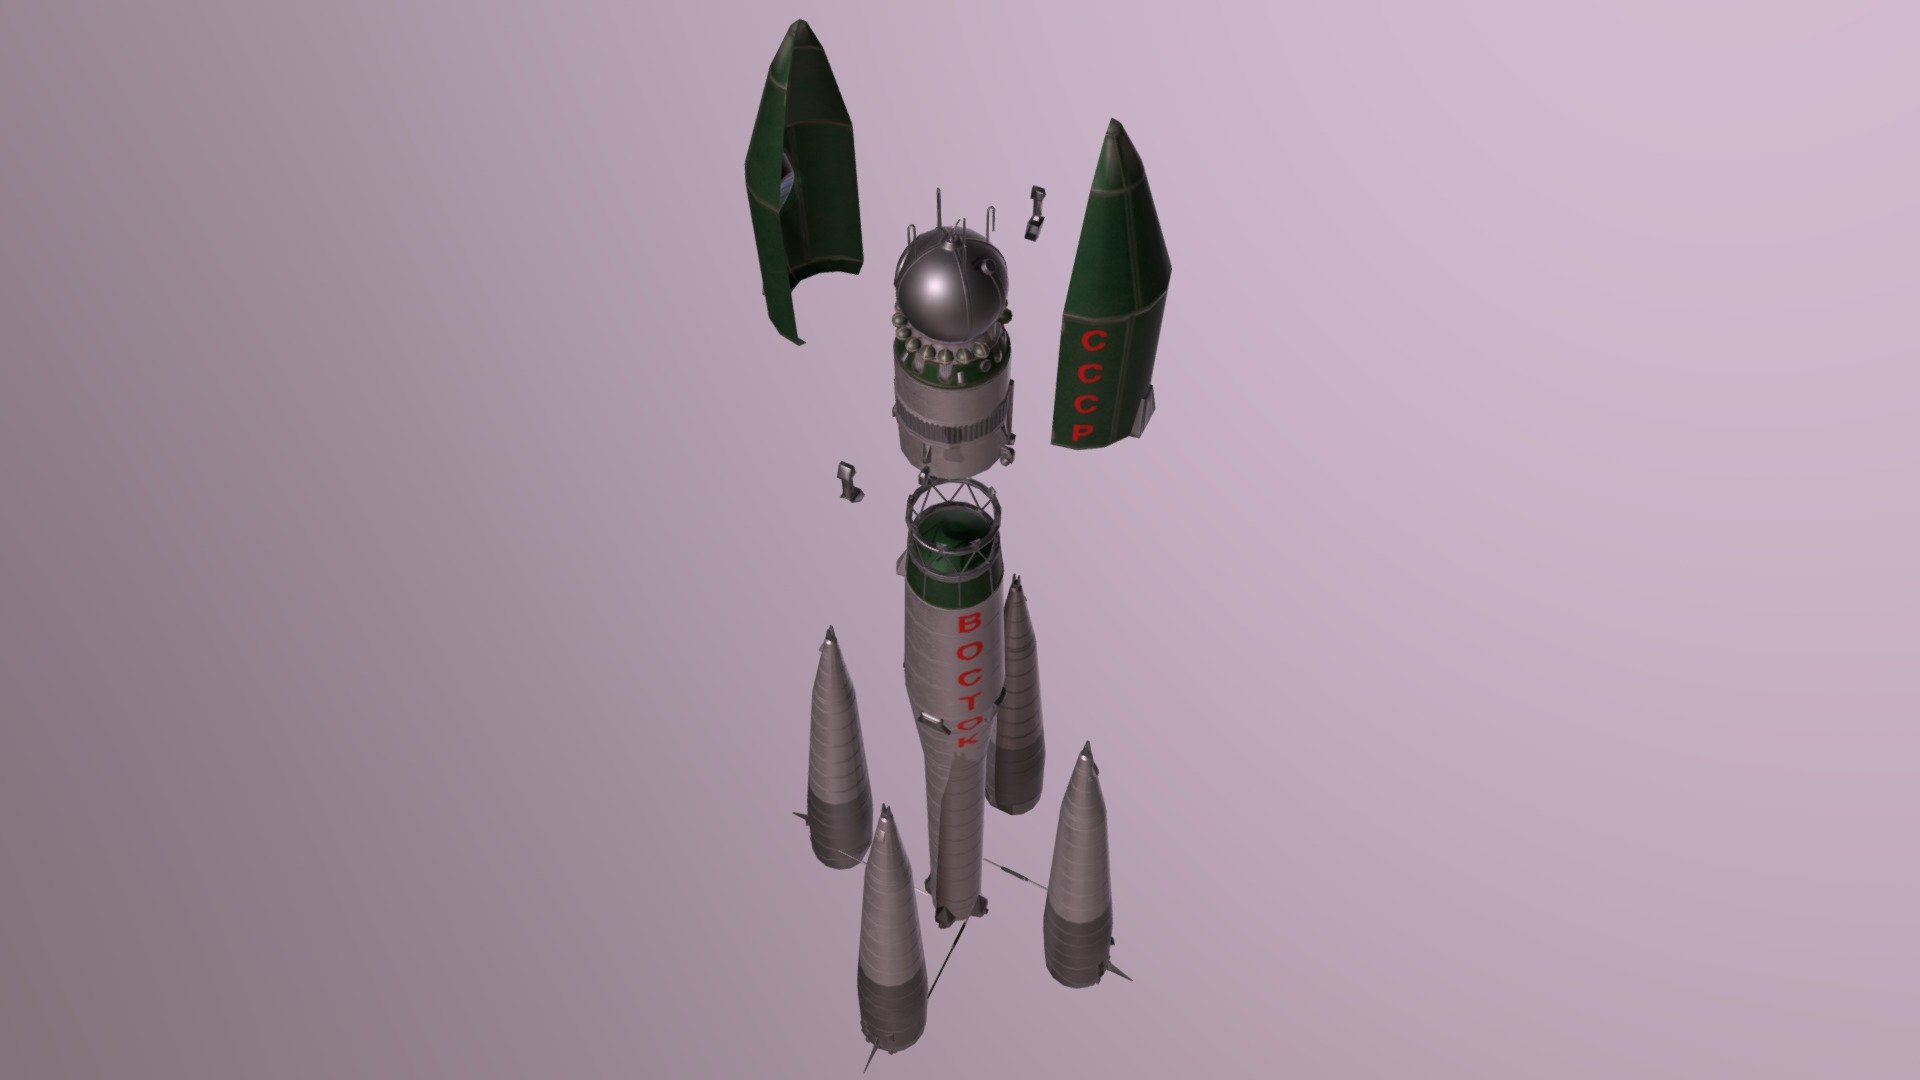 R-7 Rocket and Vostok-1 Spaceship for AR application - R-7 Rocket and Vostok-1 Spaceship - 3D model by HumanPlanetStudio 3d model